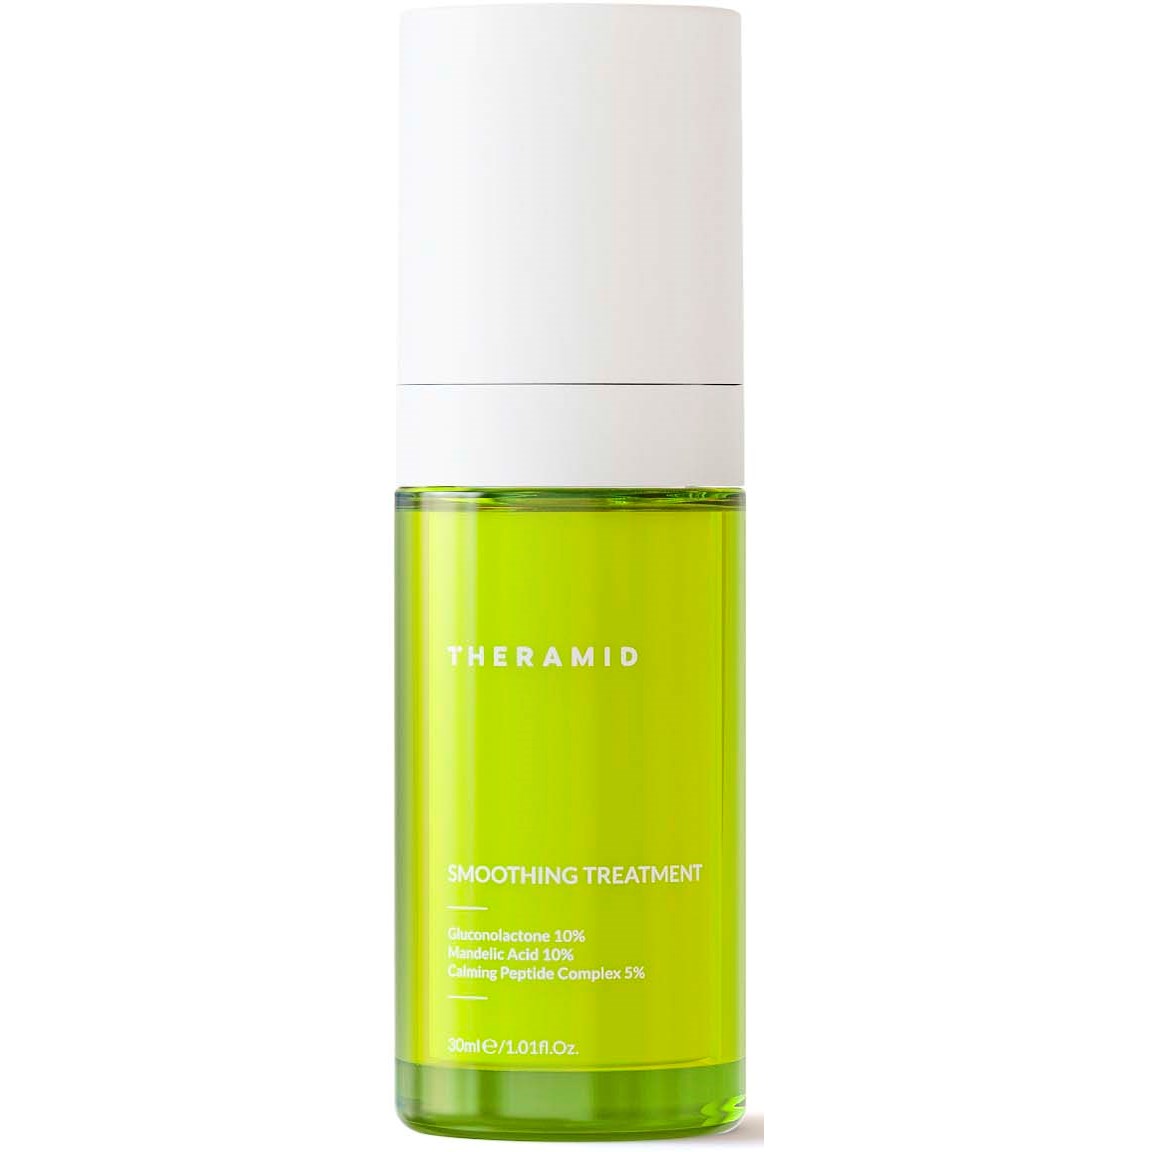 Theramid Smoothing Treatment Anti-Aging Treatment With Mild Acids